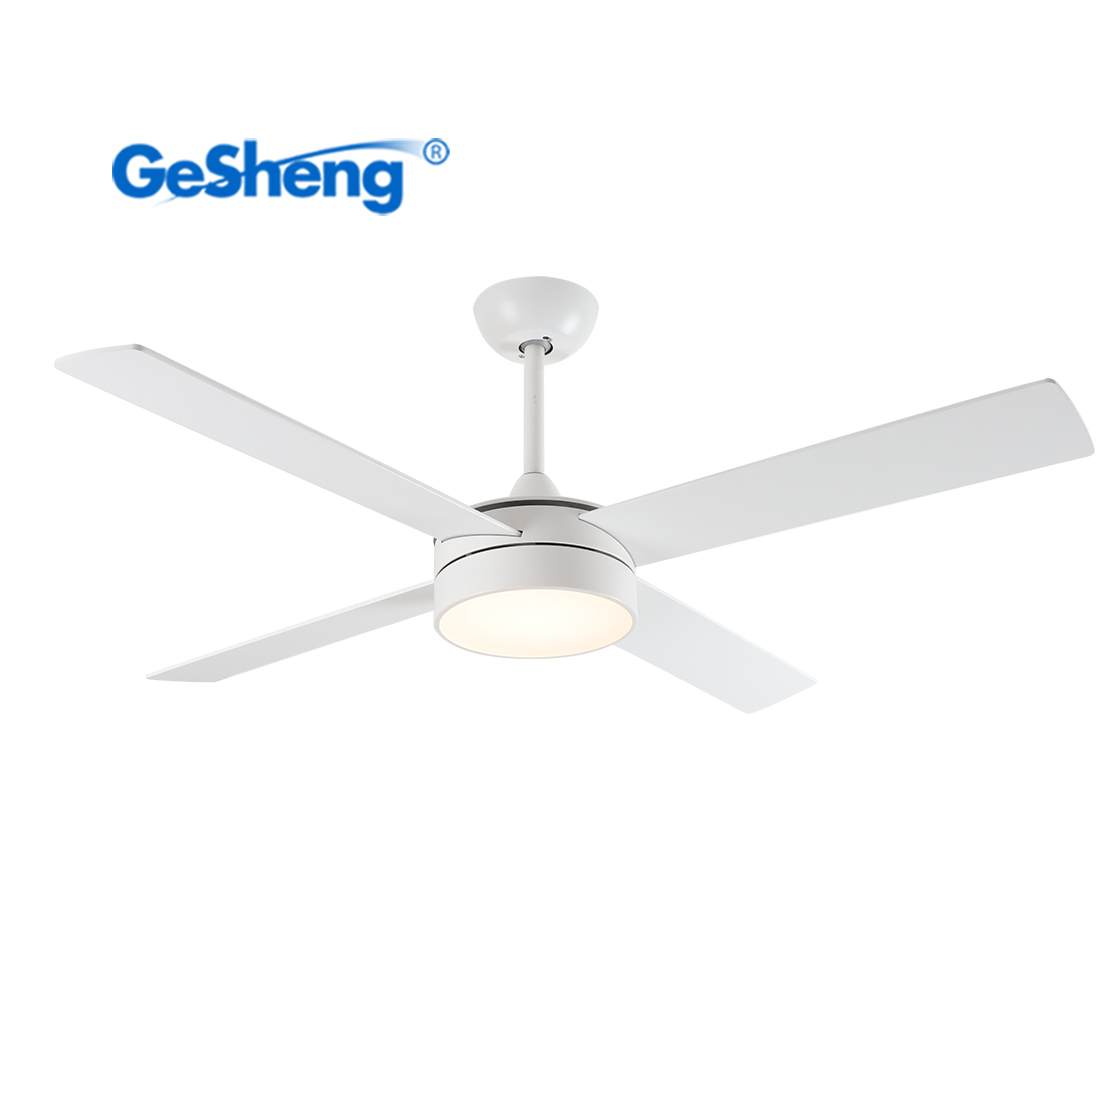 Modern commercial indoor fan light 52 inch white 4 plywood blade dc remote control led ceiling fan